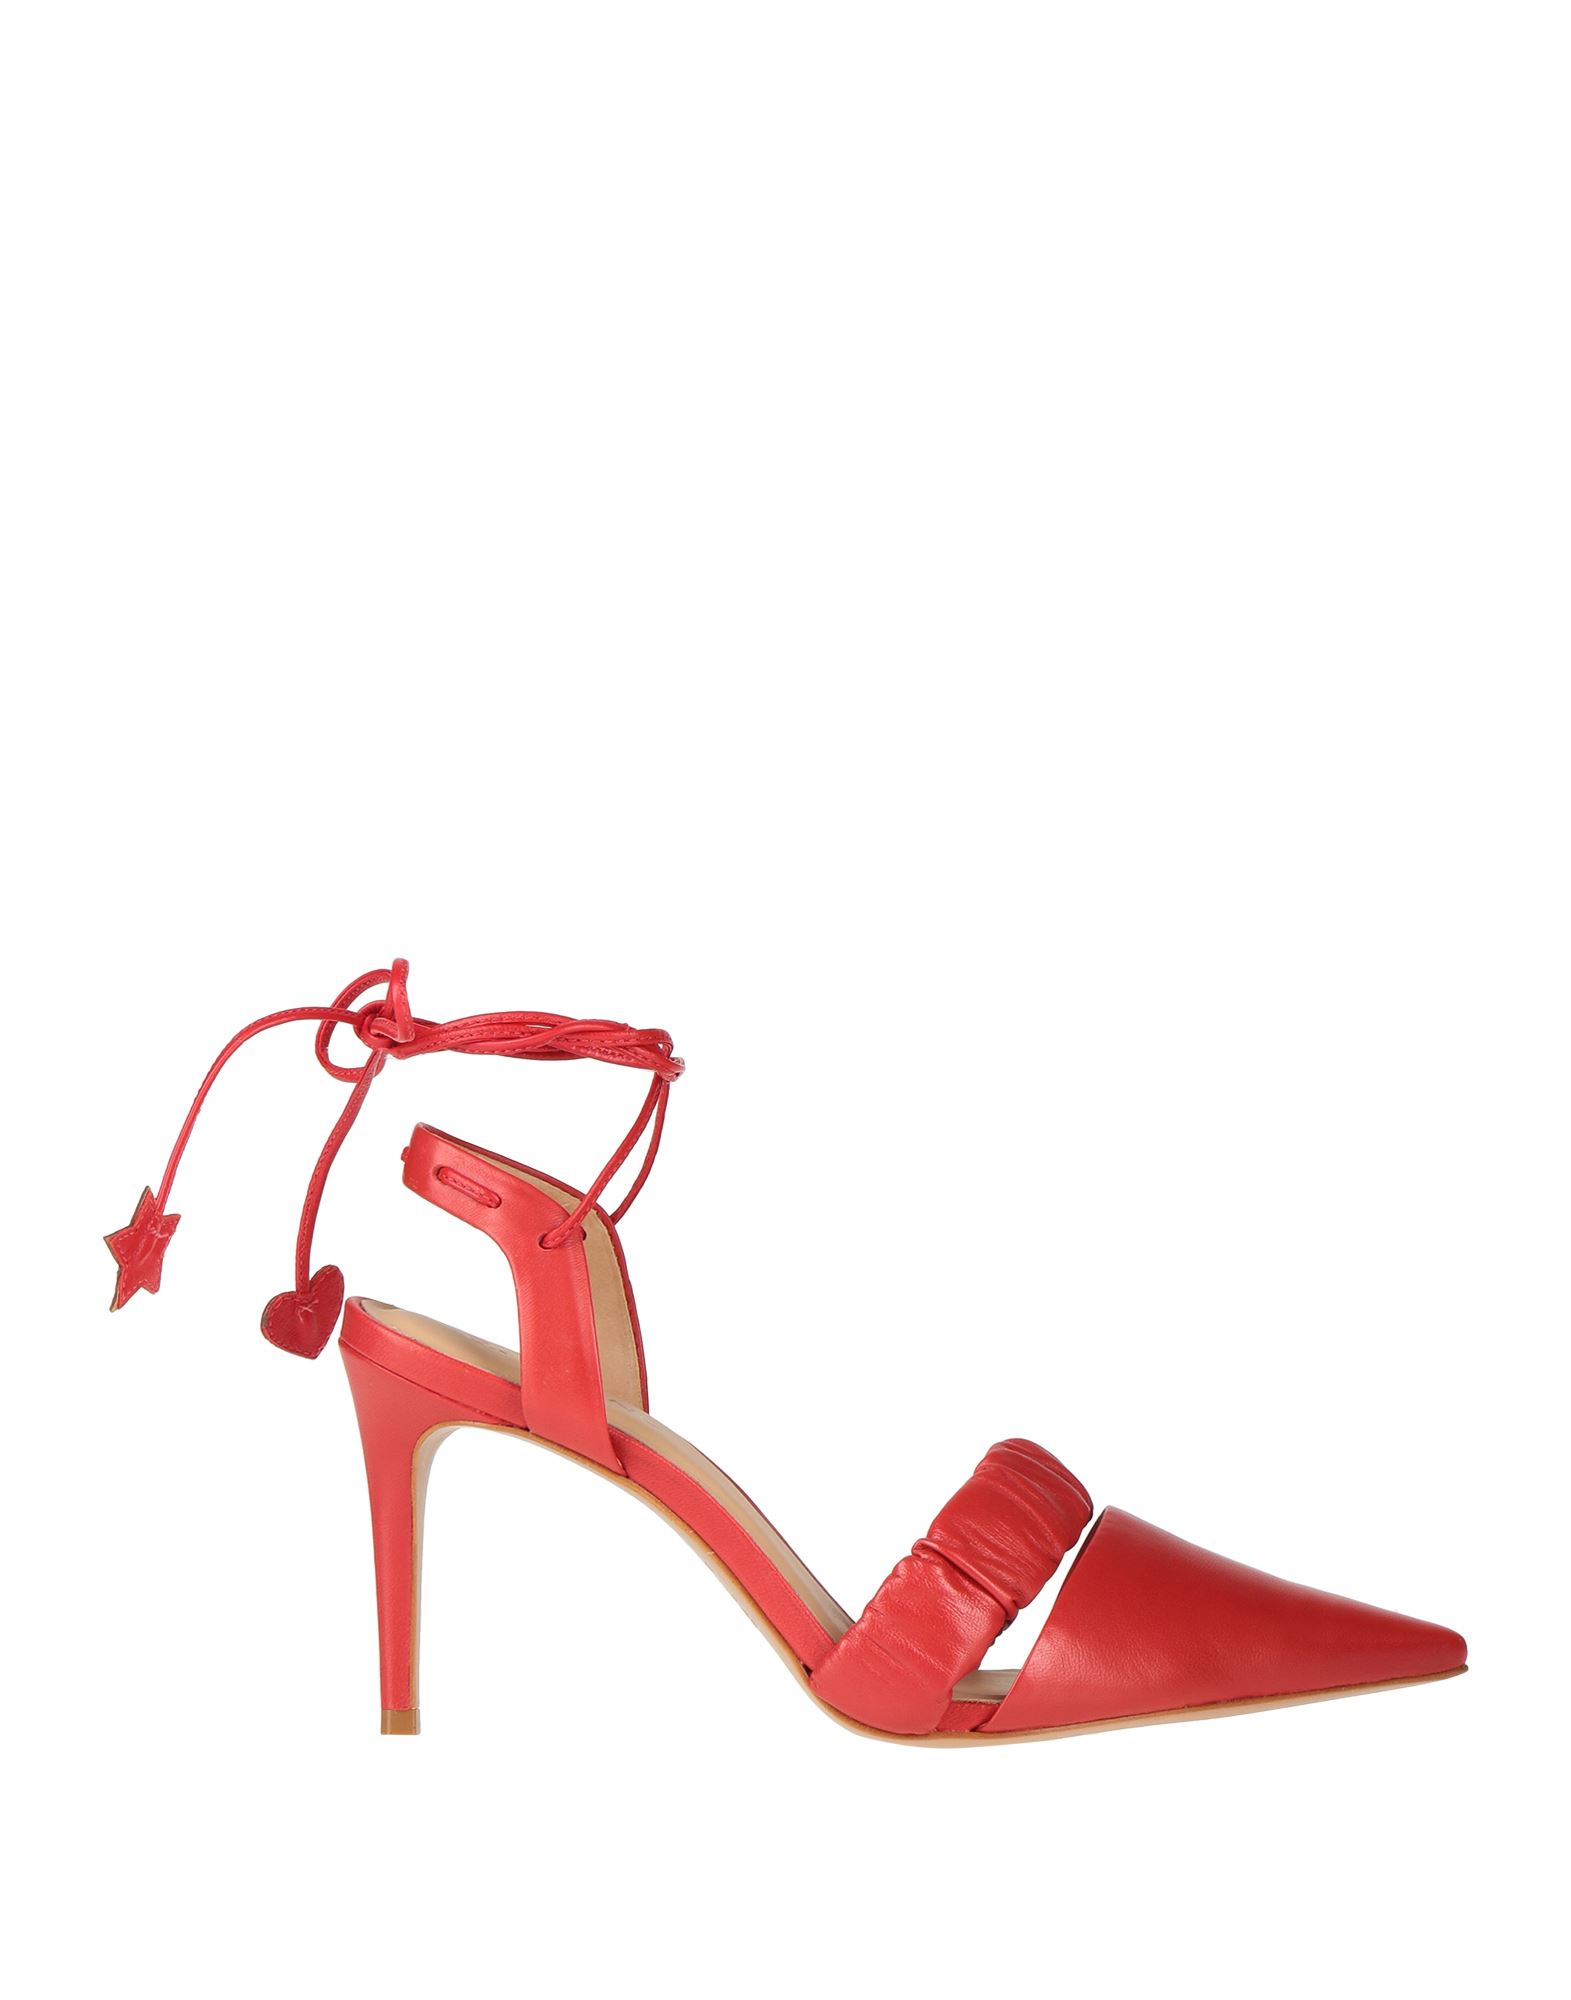 Carrano Pumps In Red